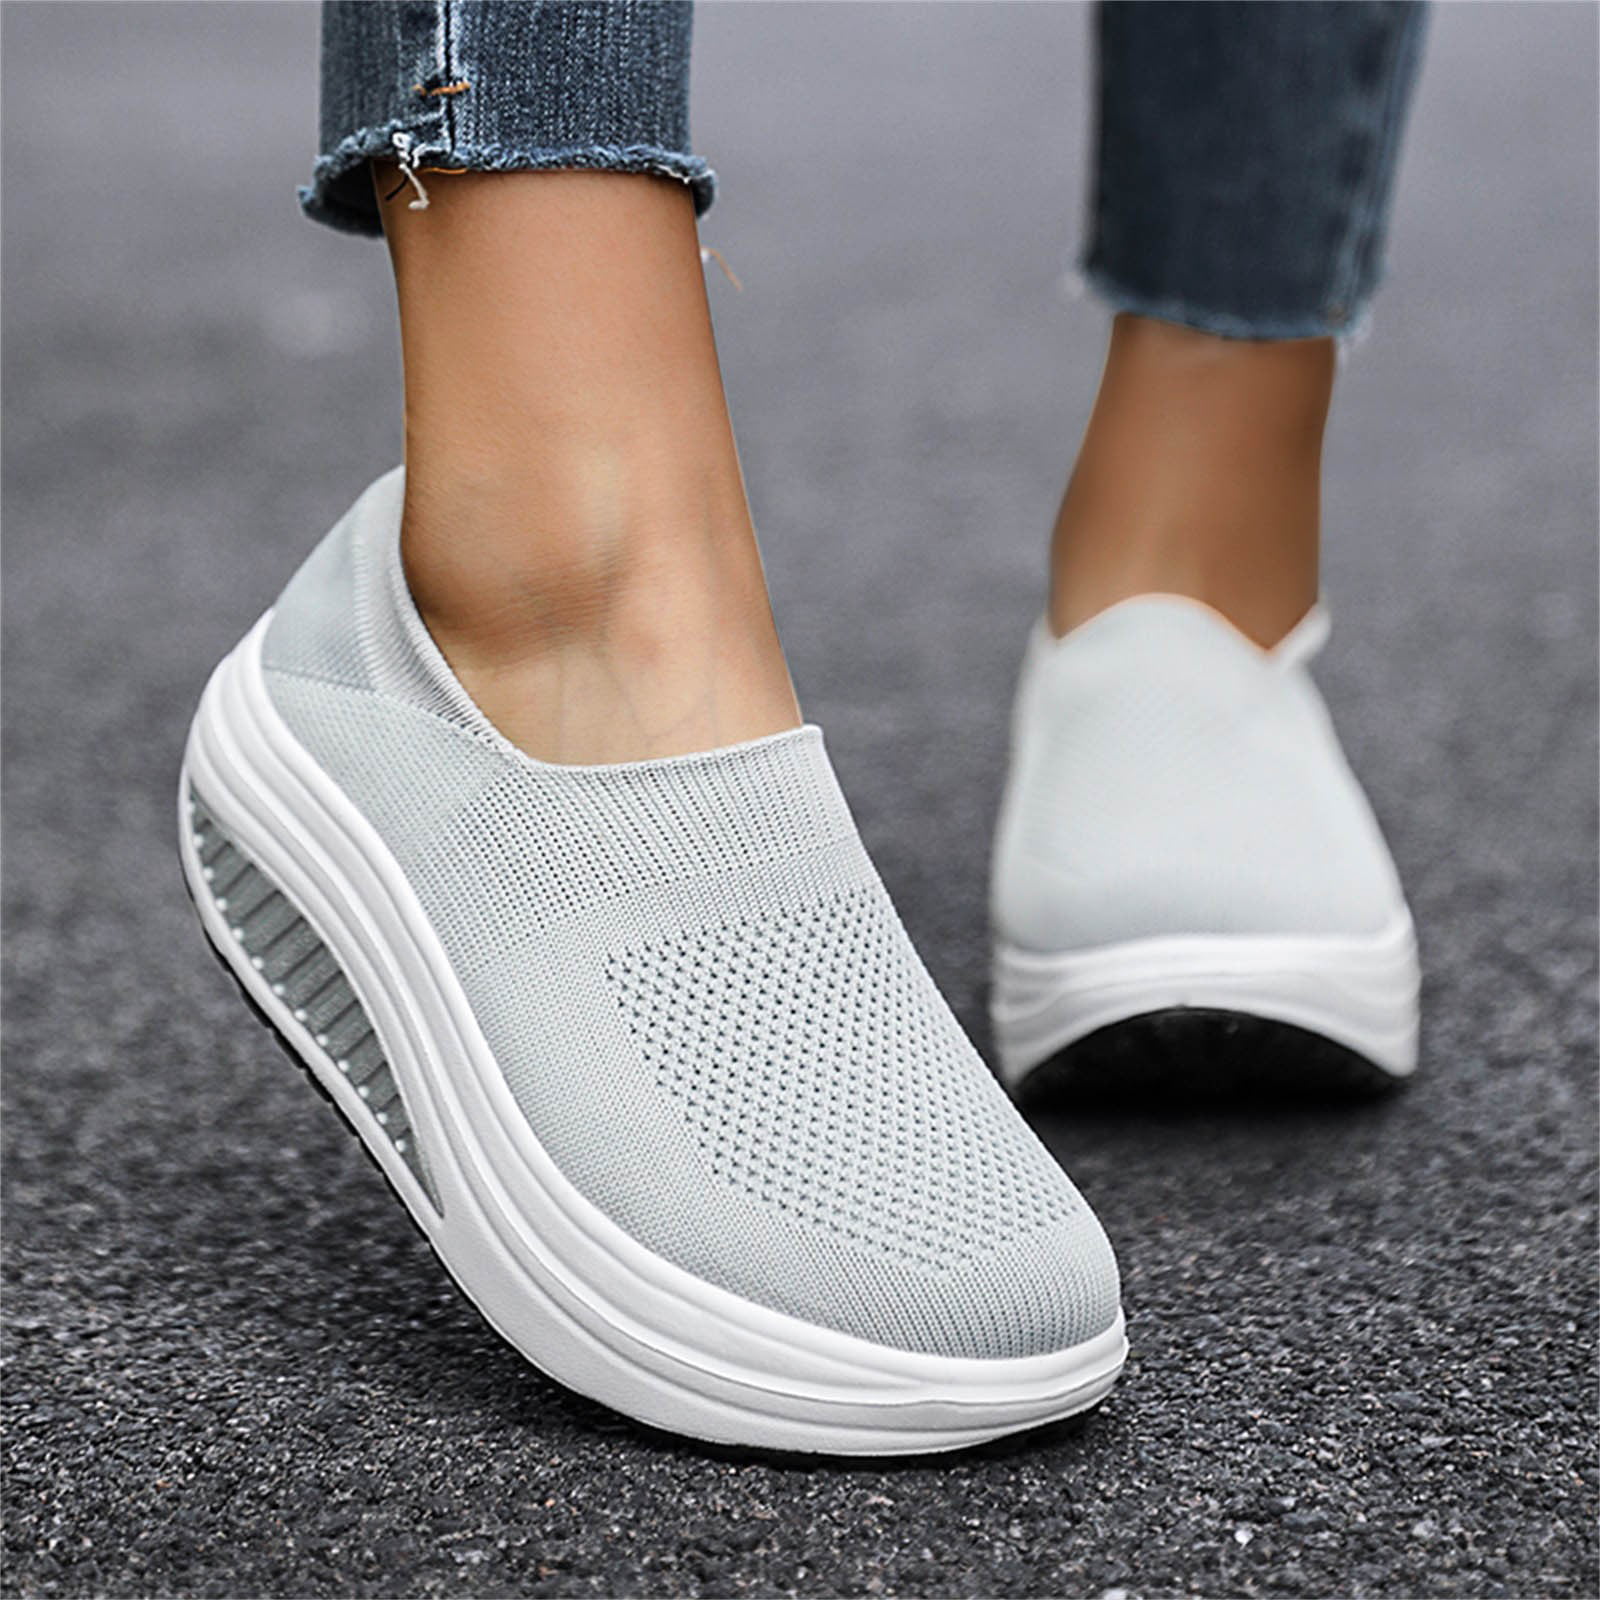  JWSVBF Women's Slip on Sneakers Womens Canvas Slip on Shoes  Fashion Rhinestone Tennis Shoes for Women Black and White Loafers White  Sneakers for Women Slip On : Sports & Outdoors